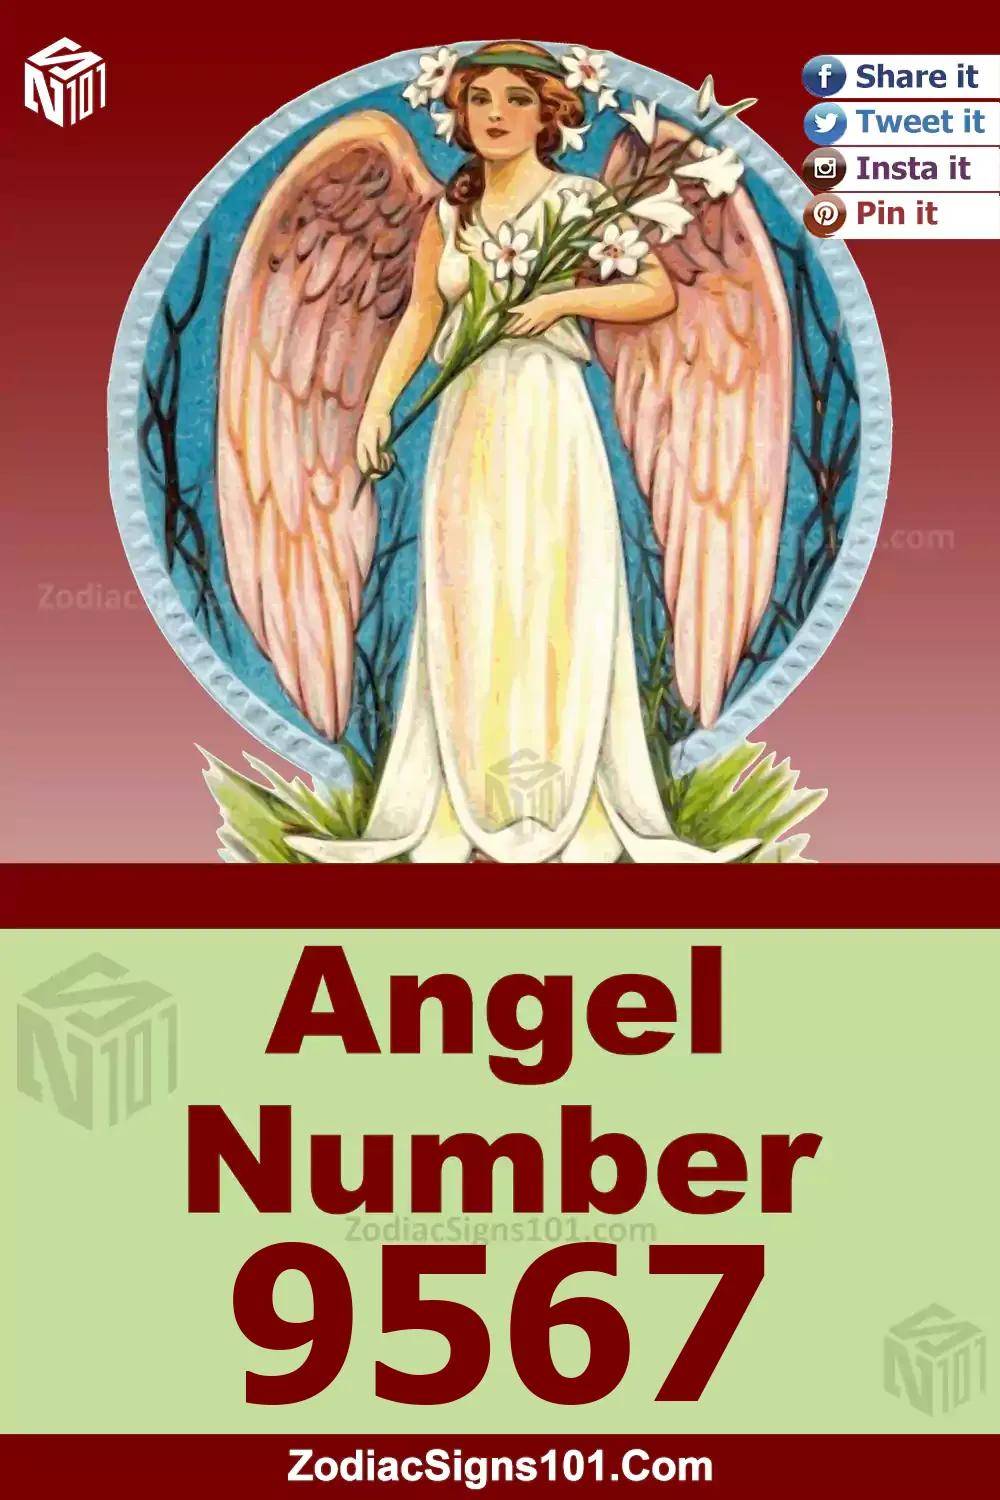 9567 Angel Number Meaning